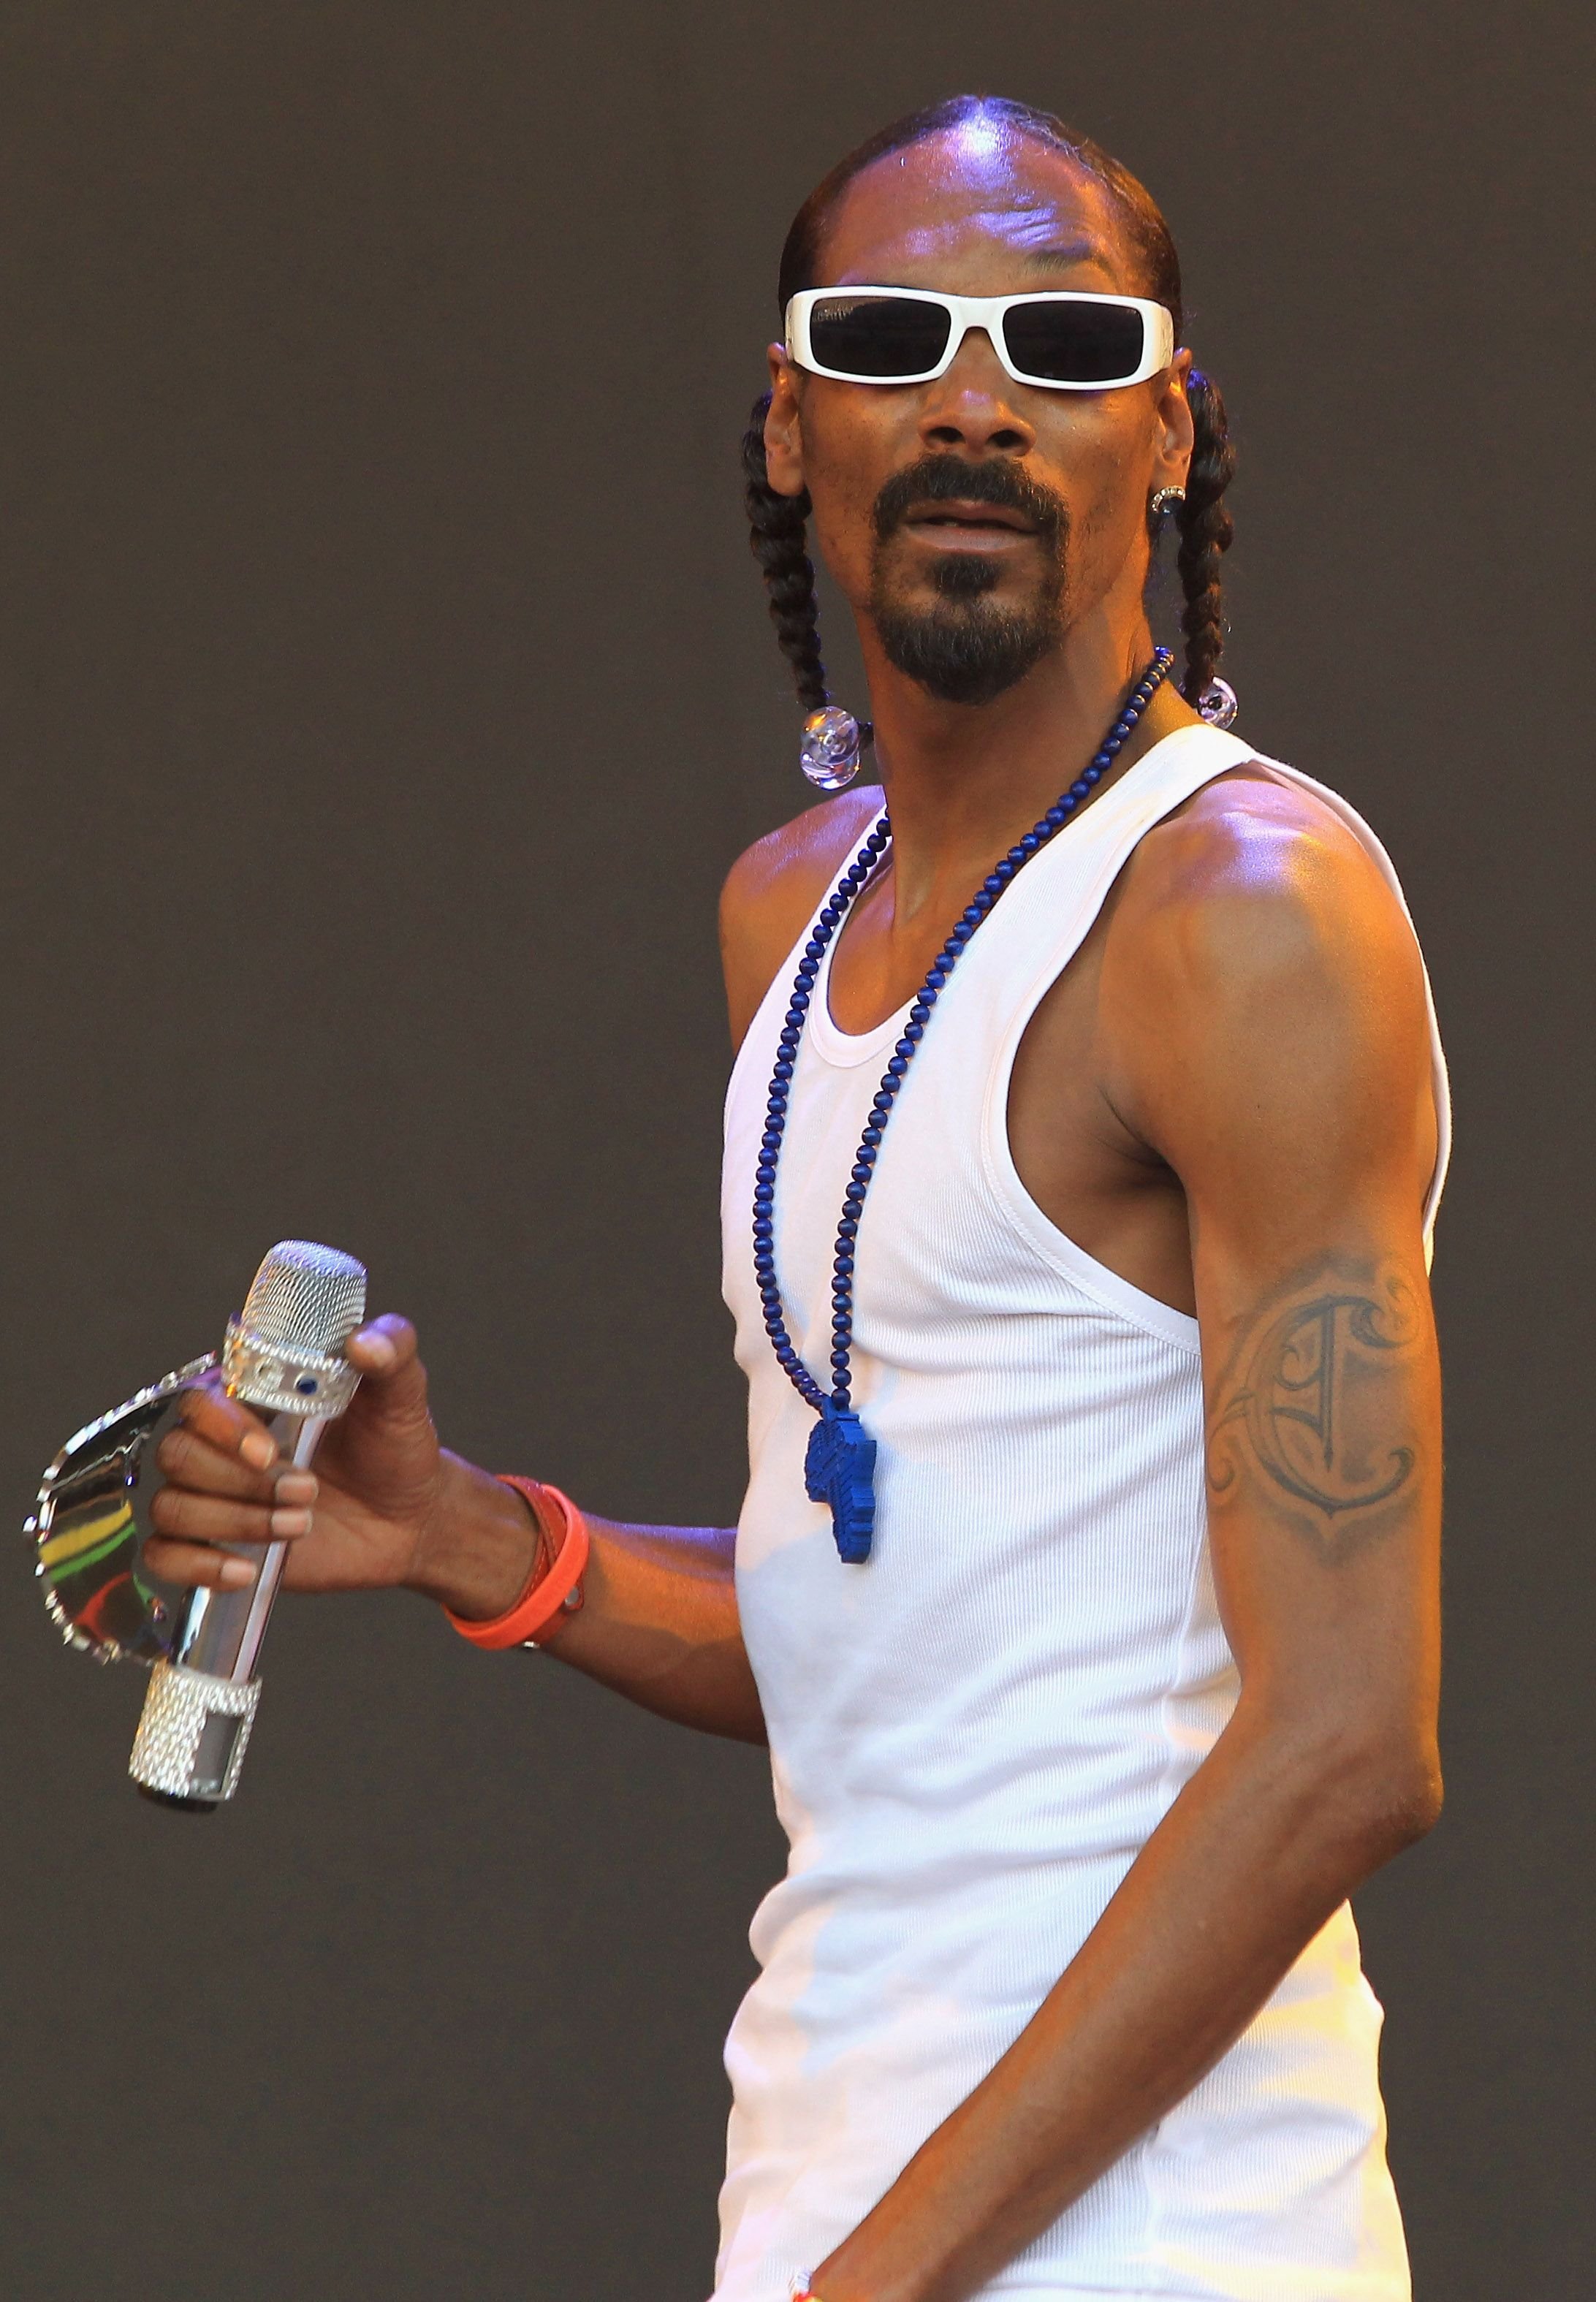 Snoop Dogg performs at Glastonbury Festival at Worthy Farm on June 25, 2010. | Photo: Getty Images